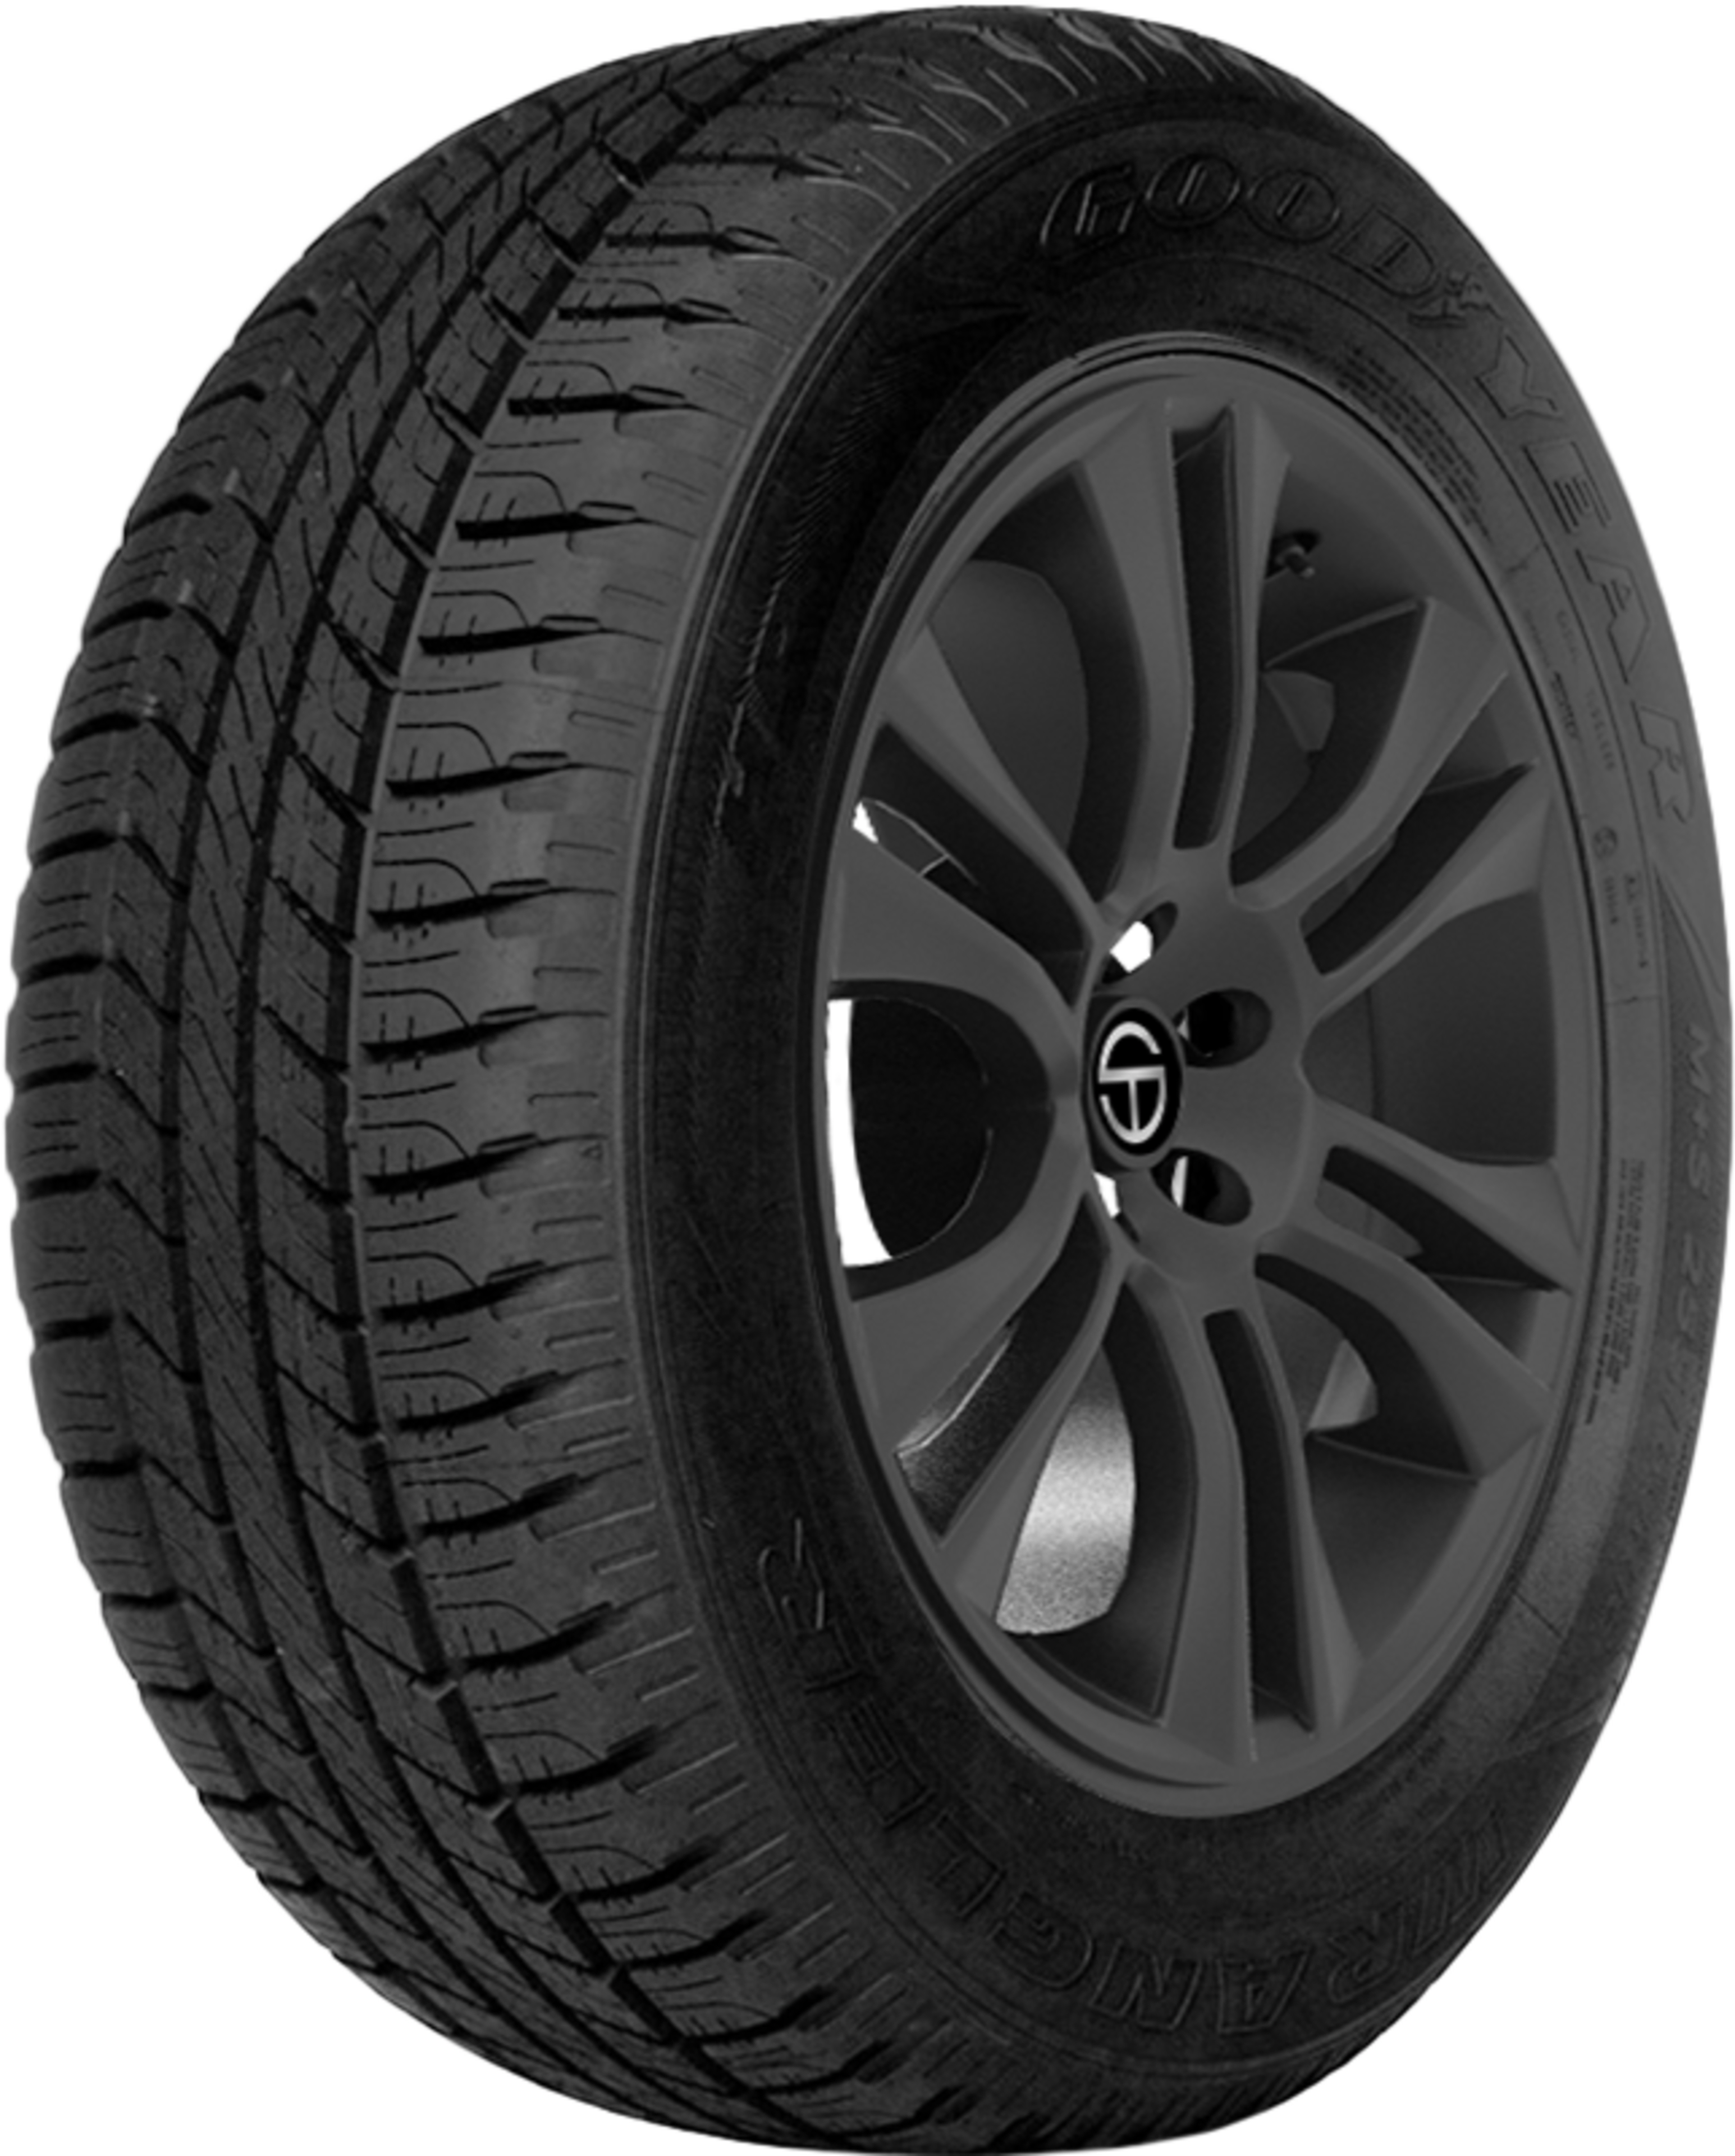 Buy Goodyear Wrangler HP All-Weather Tires Online | SimpleTire